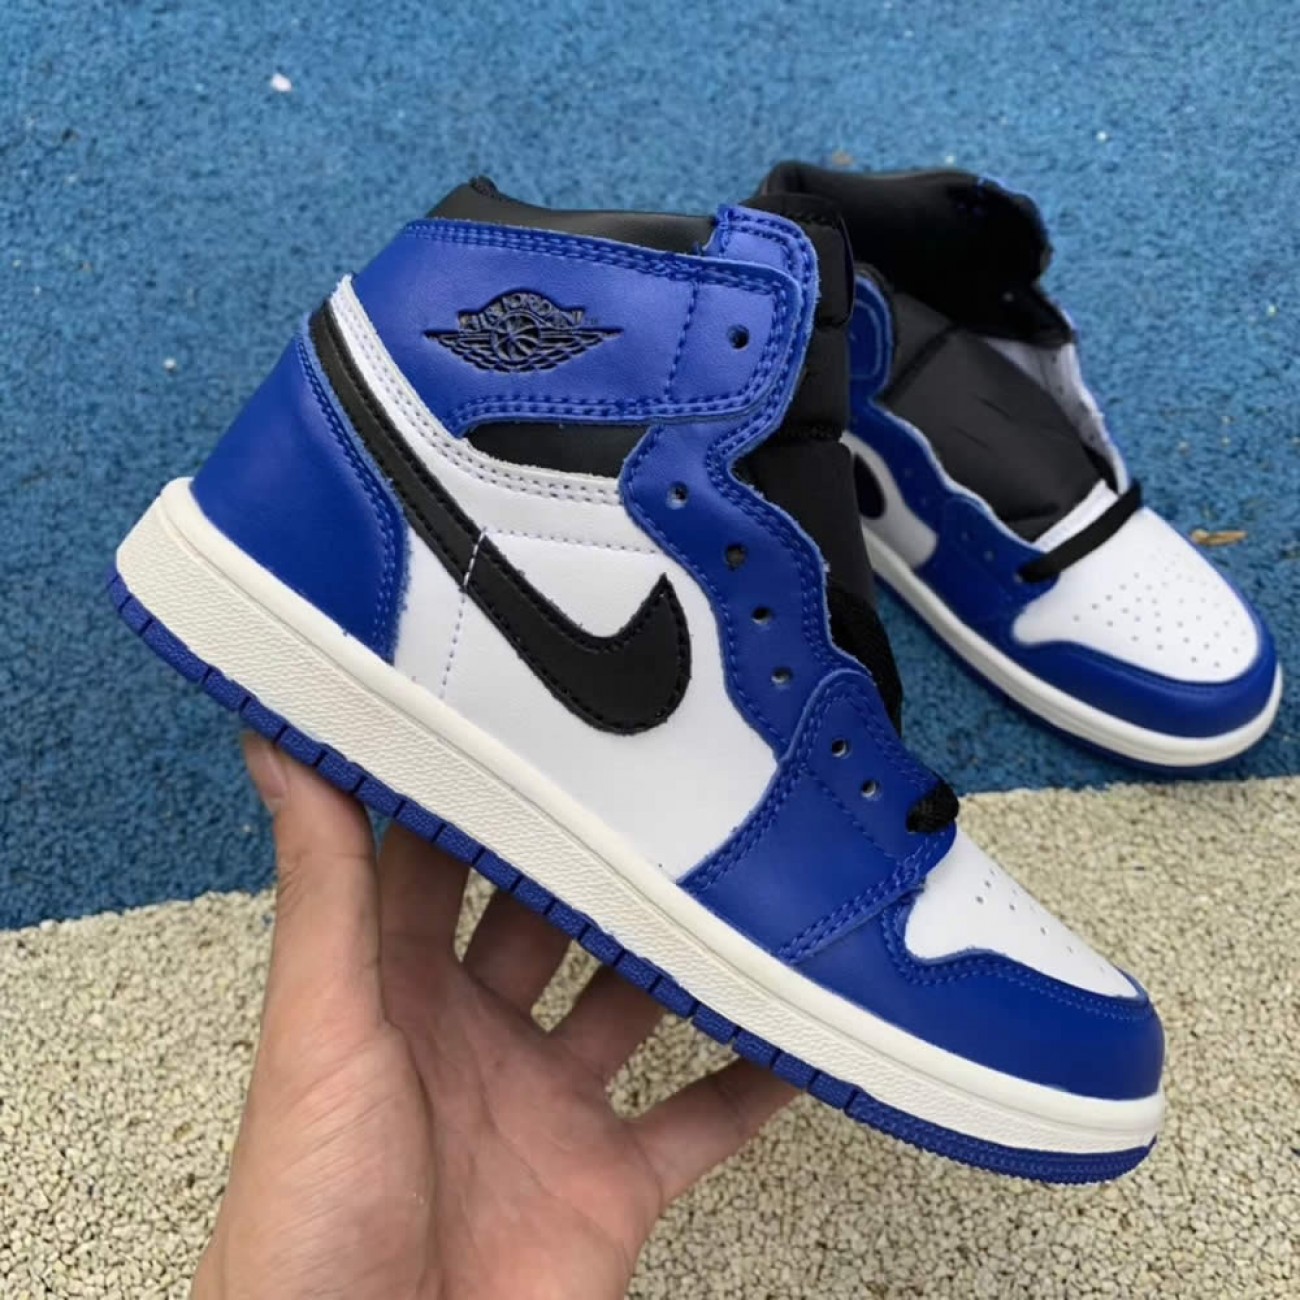 List 93+ Pictures Images Of Jordan 1 Updated